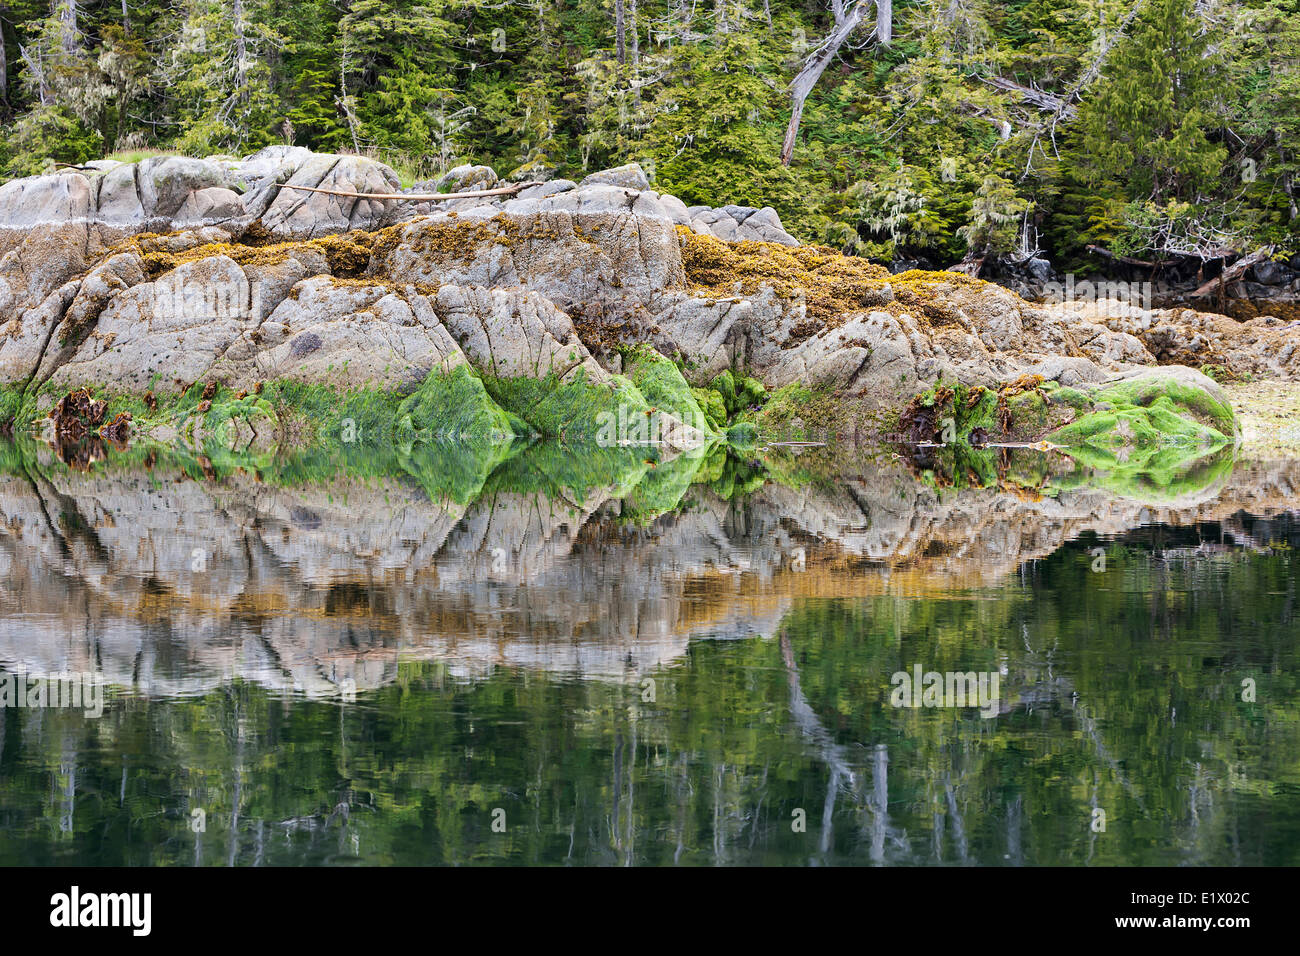 Reflections in calm waters give rise to nature's design.  Dodwell Island The Great Bear Rainforest Northern British Columbia Stock Photo